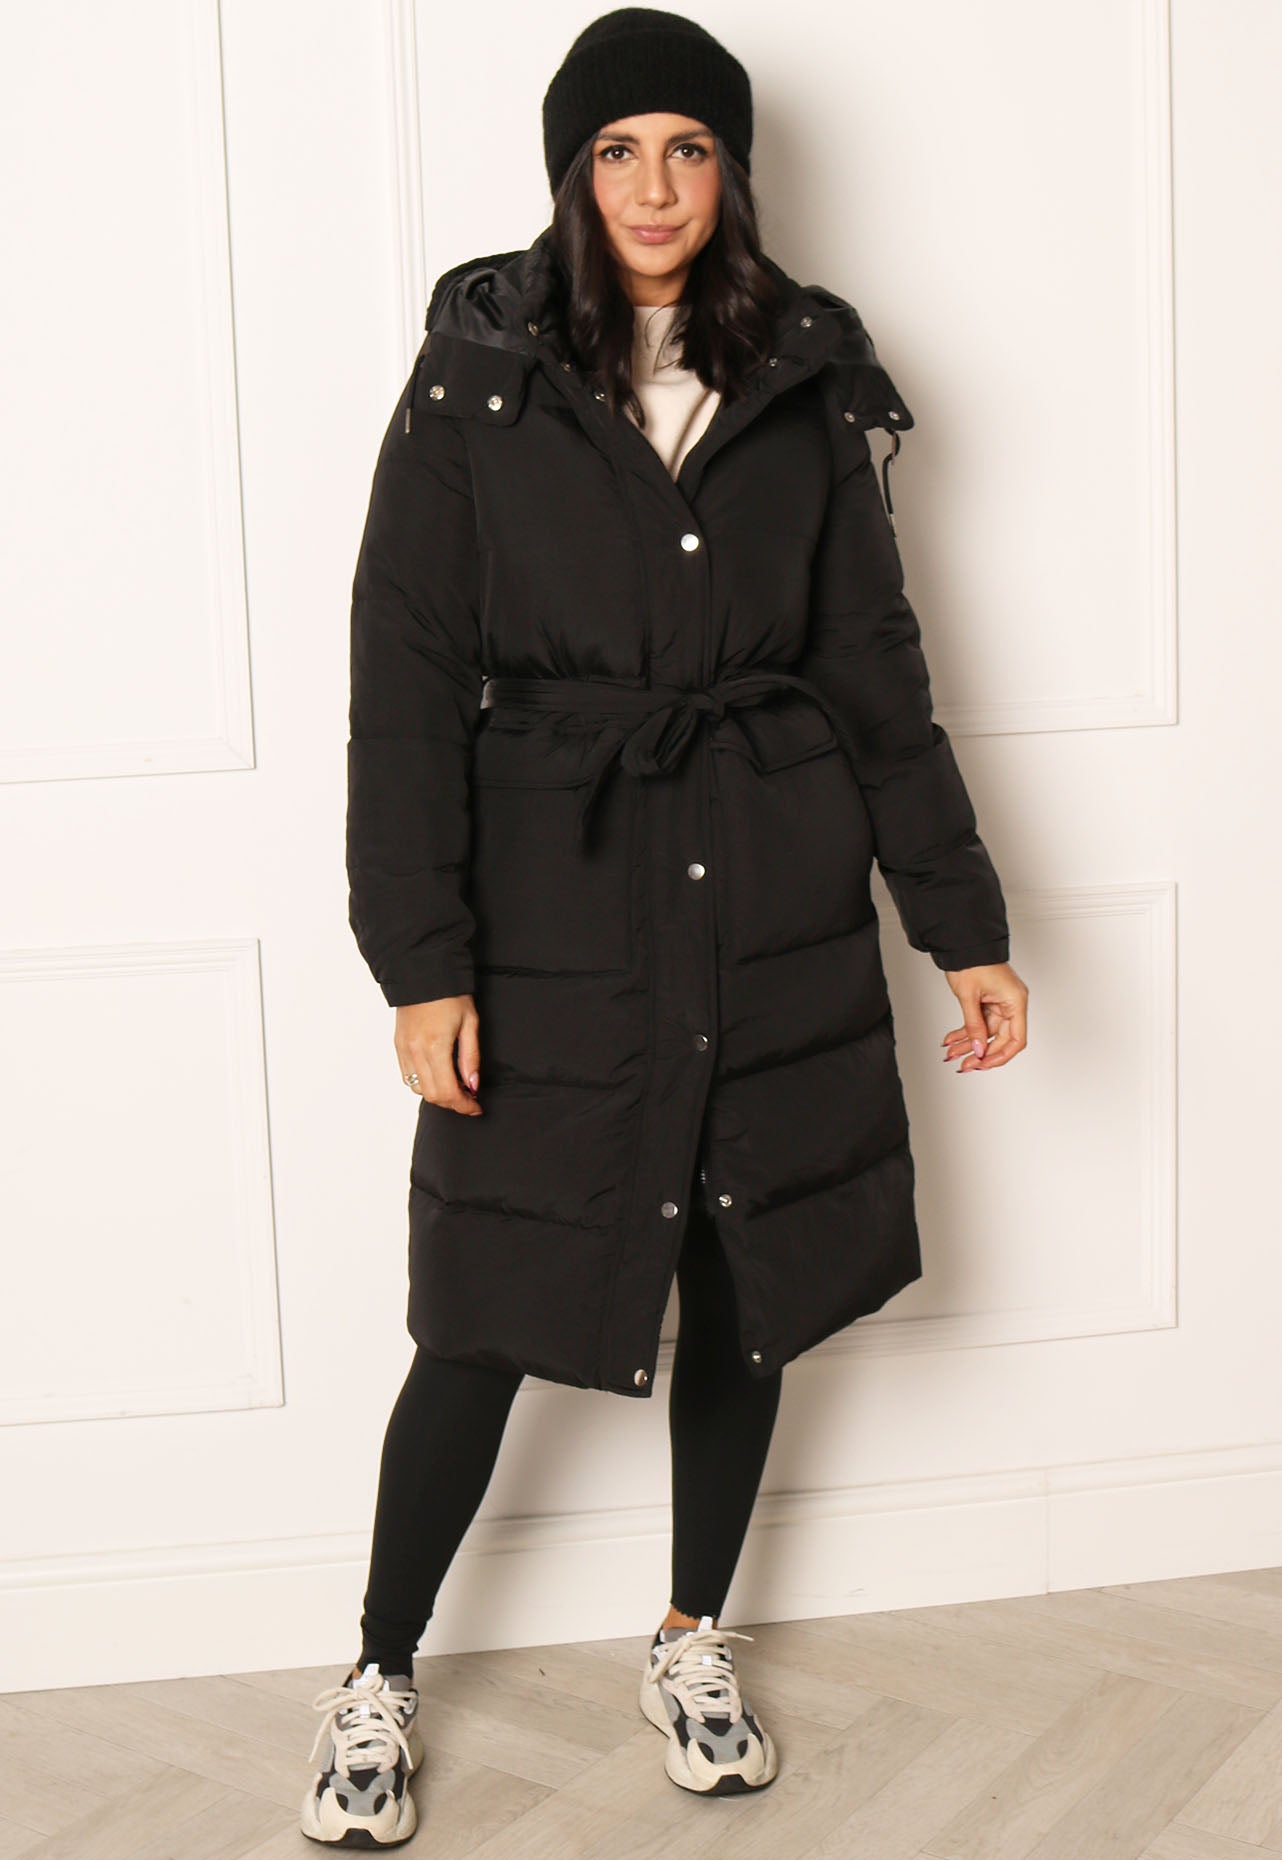 JXLENORA OVERSIZED SHINY QUILTED COAT SN